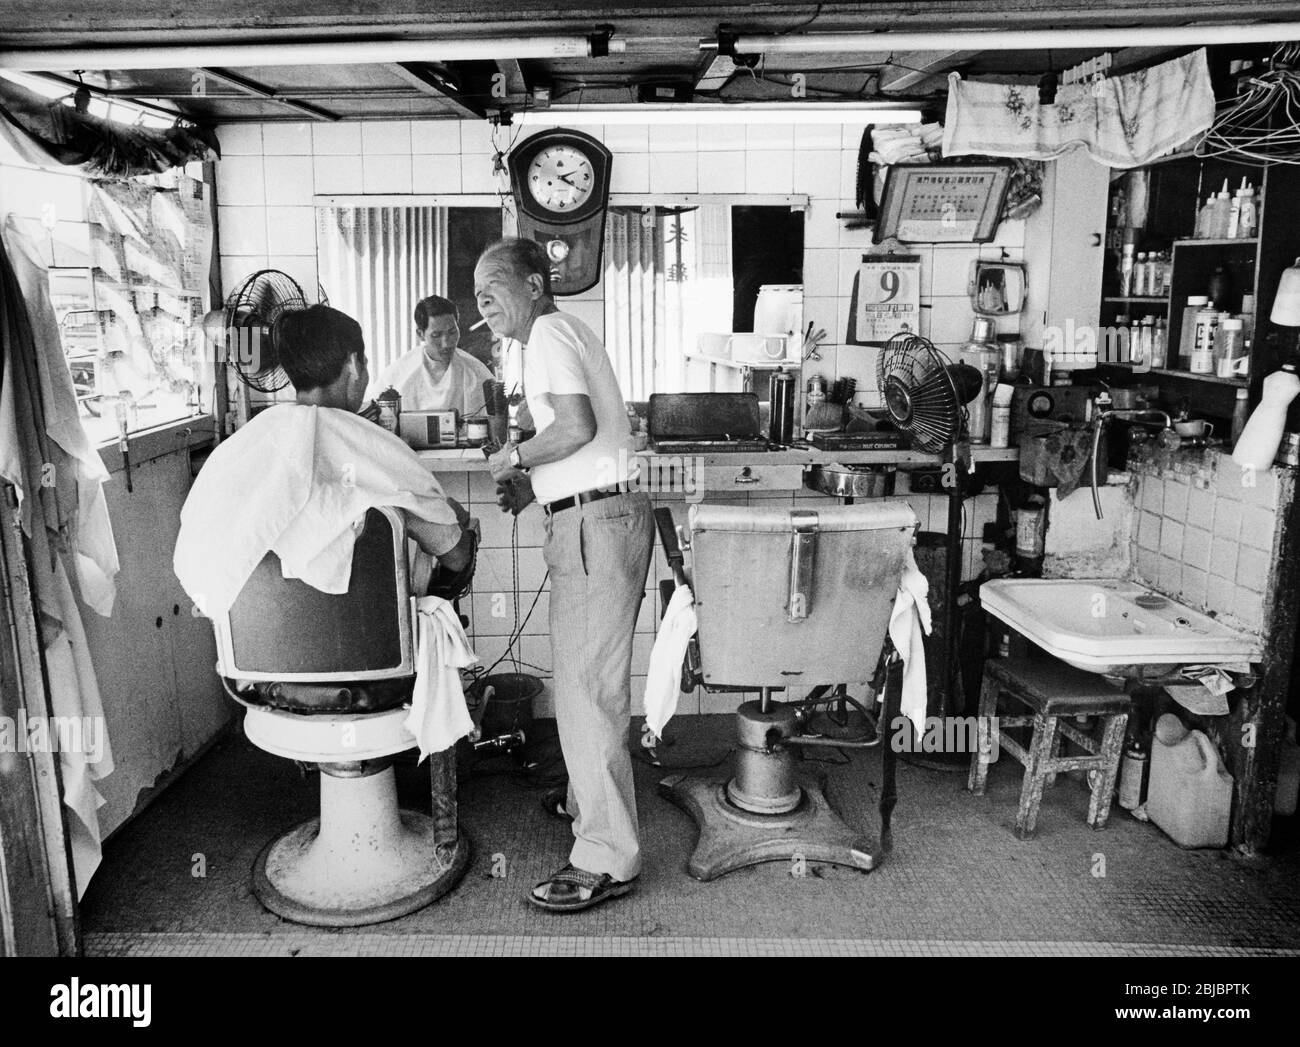 Hong Kong October 1986 Hairdresser, Shek Kirmei. The picture is is part of a collection of photographs taken in Hong Kong between September and November, 1986. They represent a snapshot of Daily Life in the Crown Colony eleven years before sovereignty was transferred back to mainland China. Photograph by Howard Walker / Alamy. Stock Photo